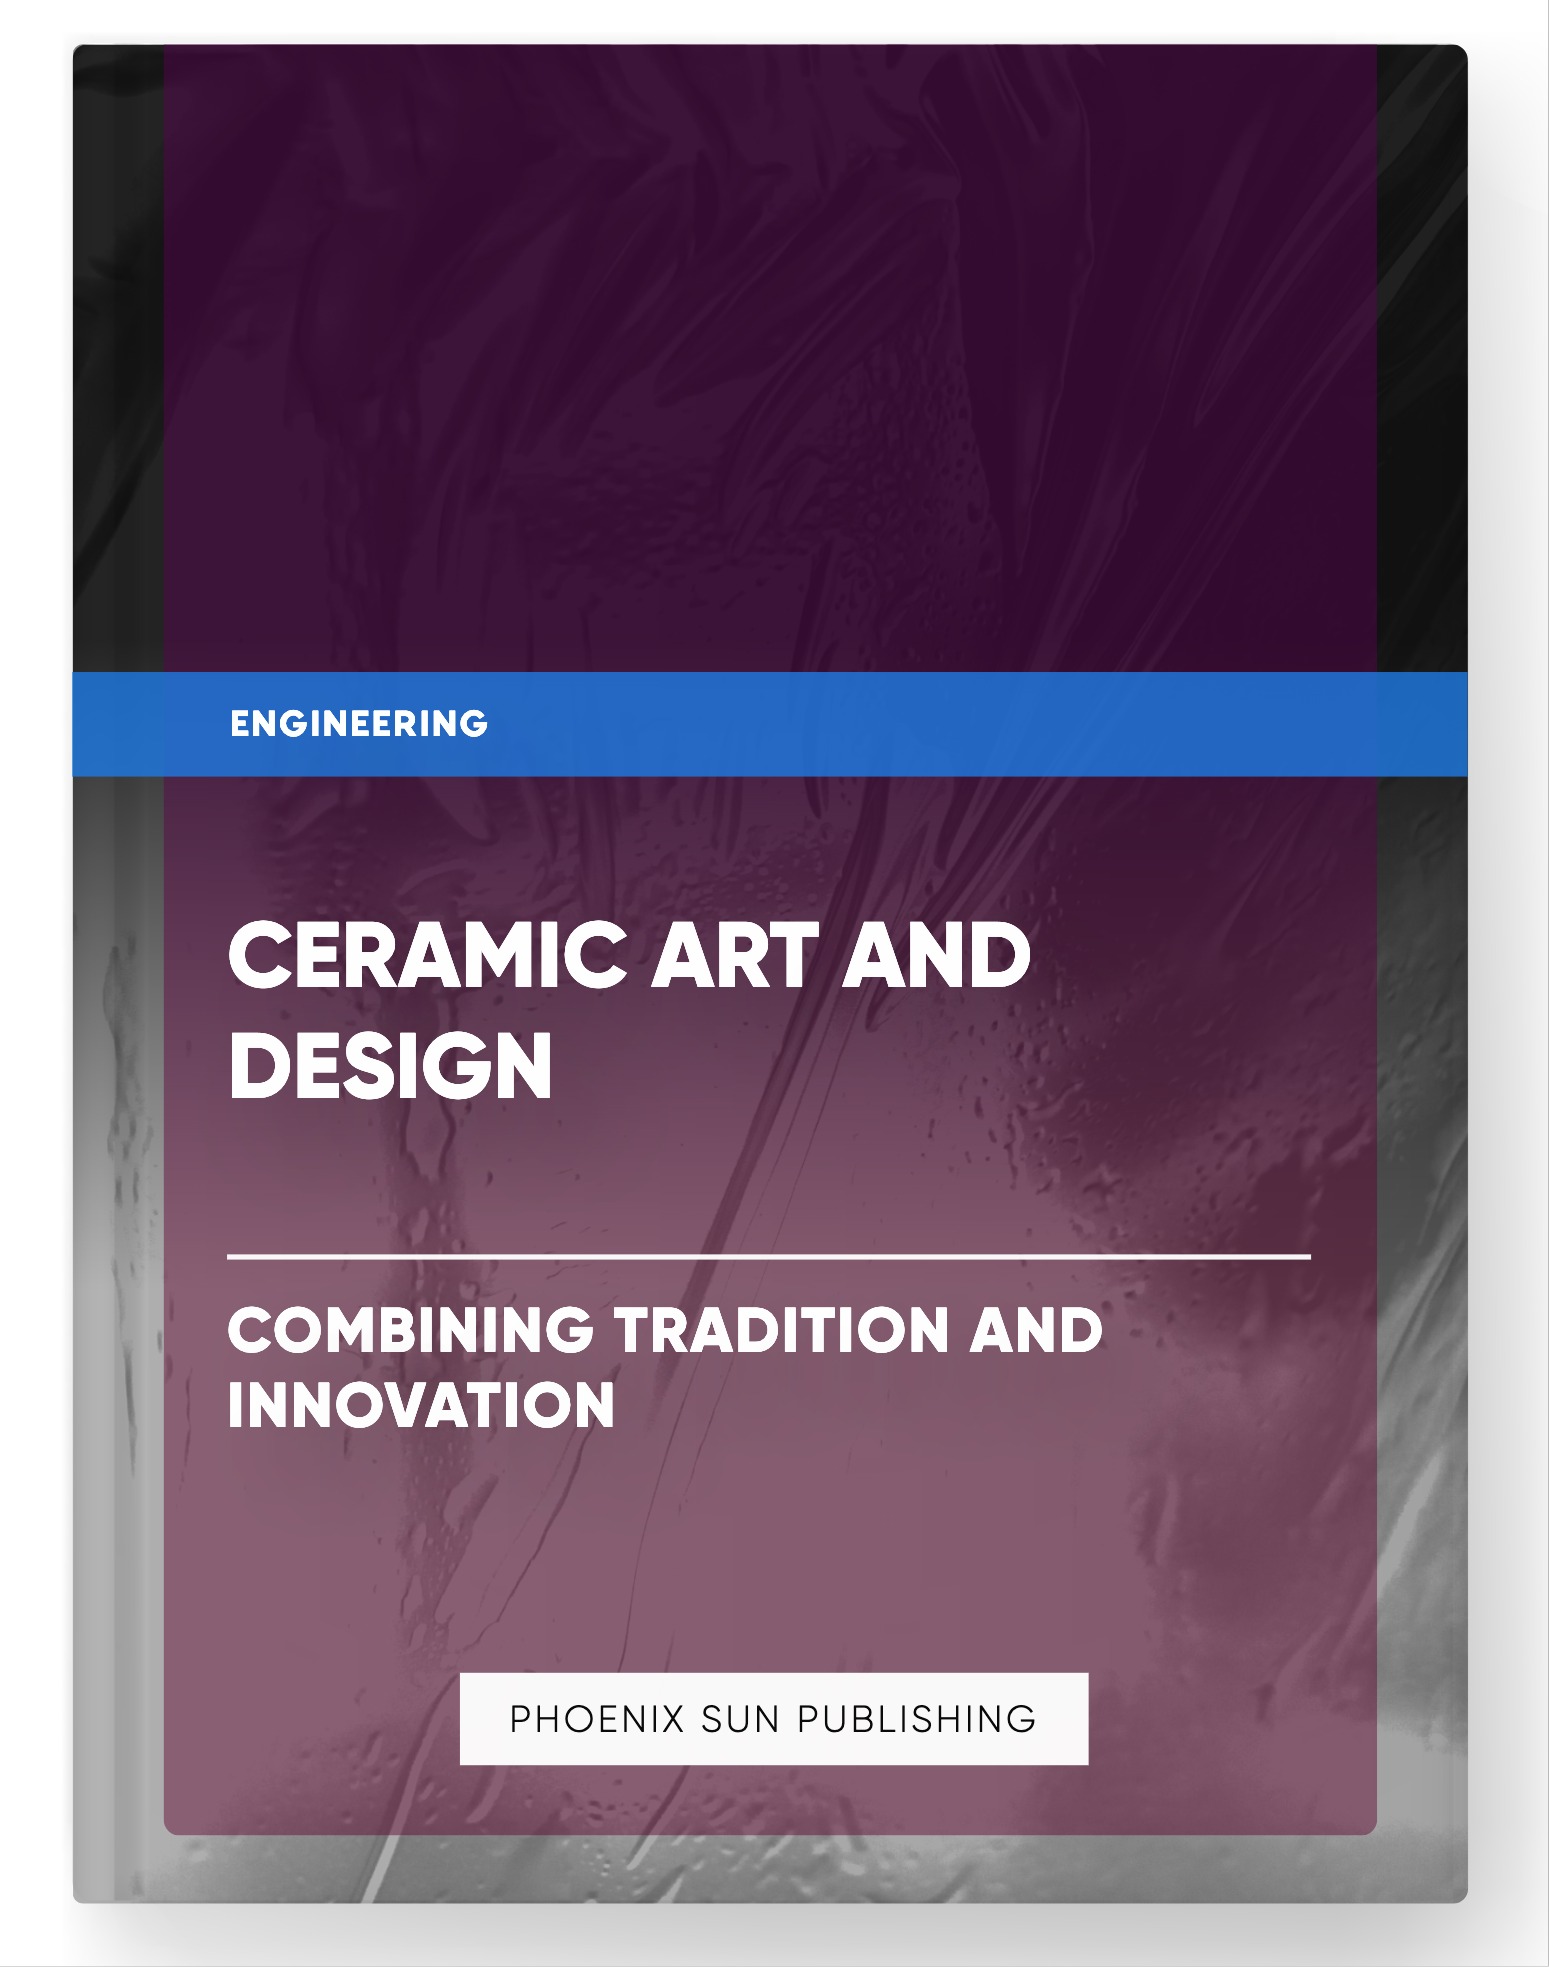 Ceramic Art and Design – Combining Tradition and Innovation